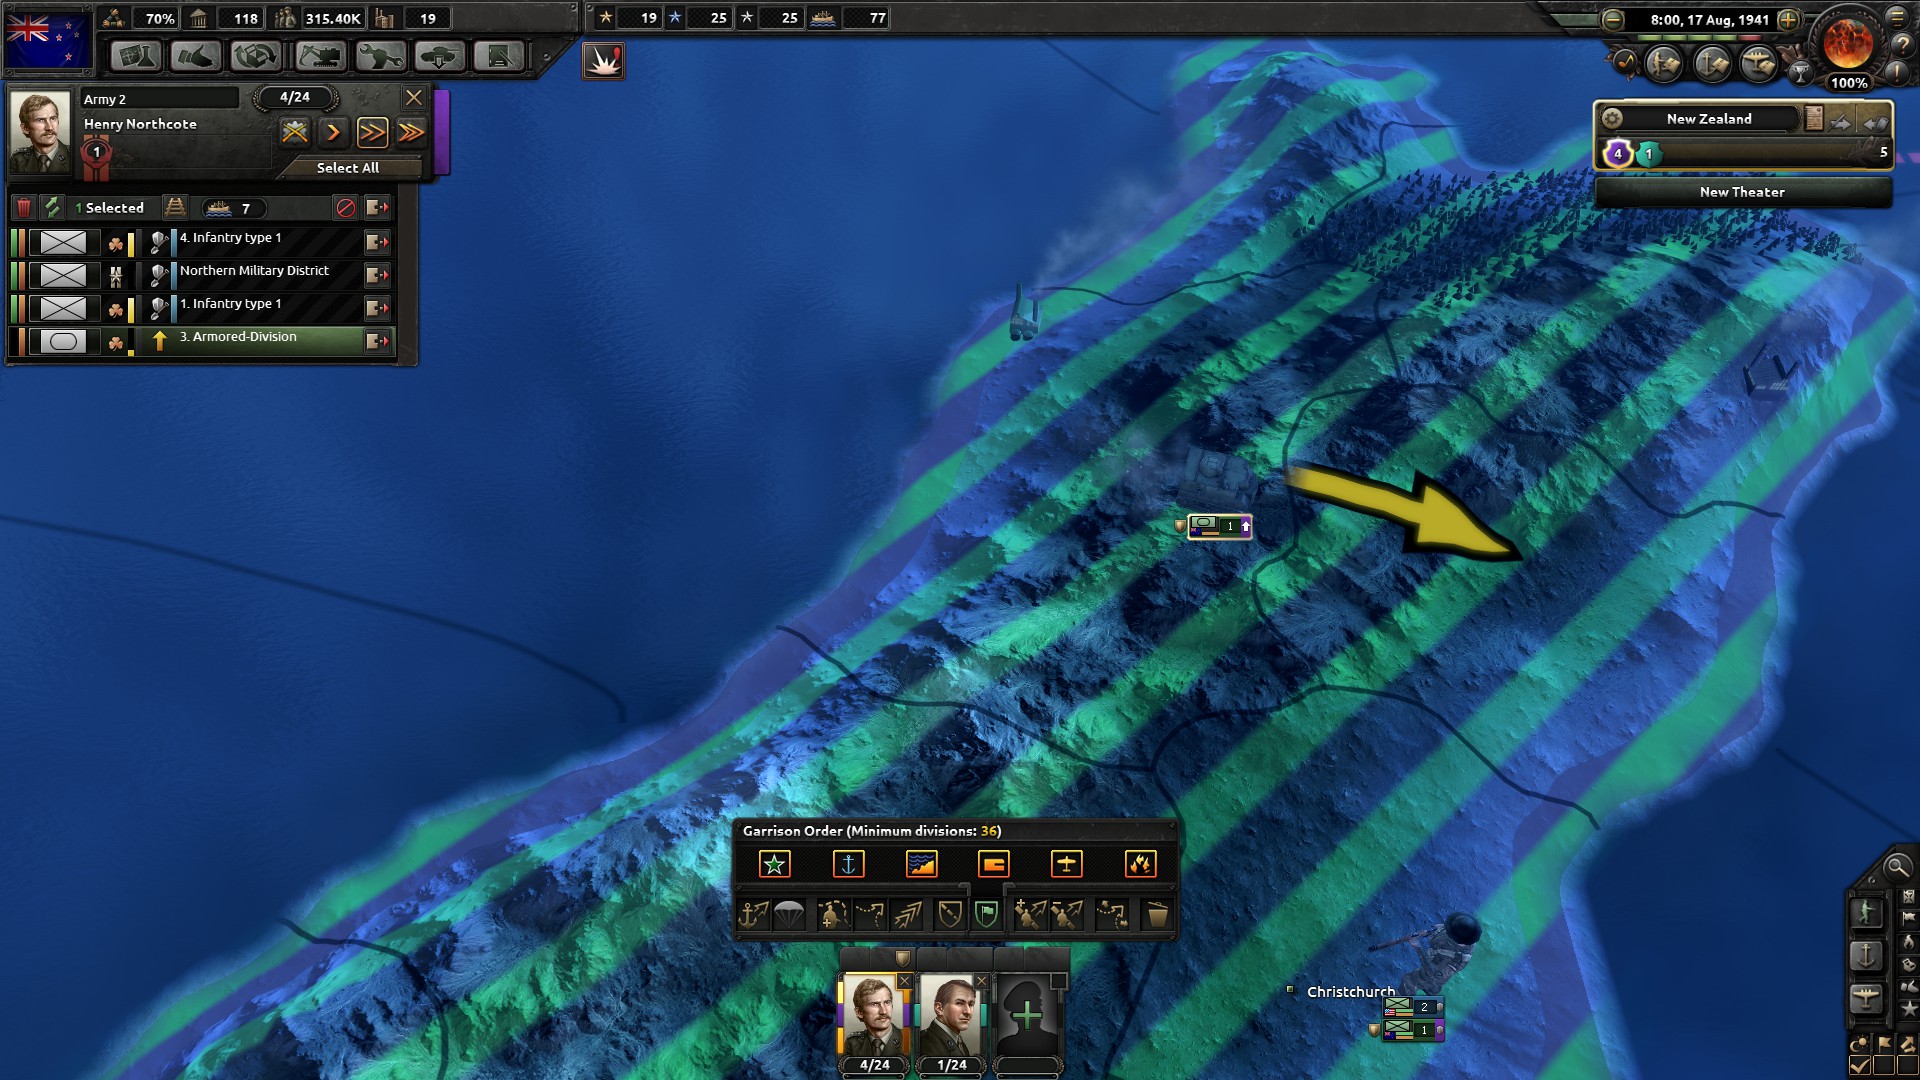 Hearts of Iron IV: Together for Victory - screenshot 4